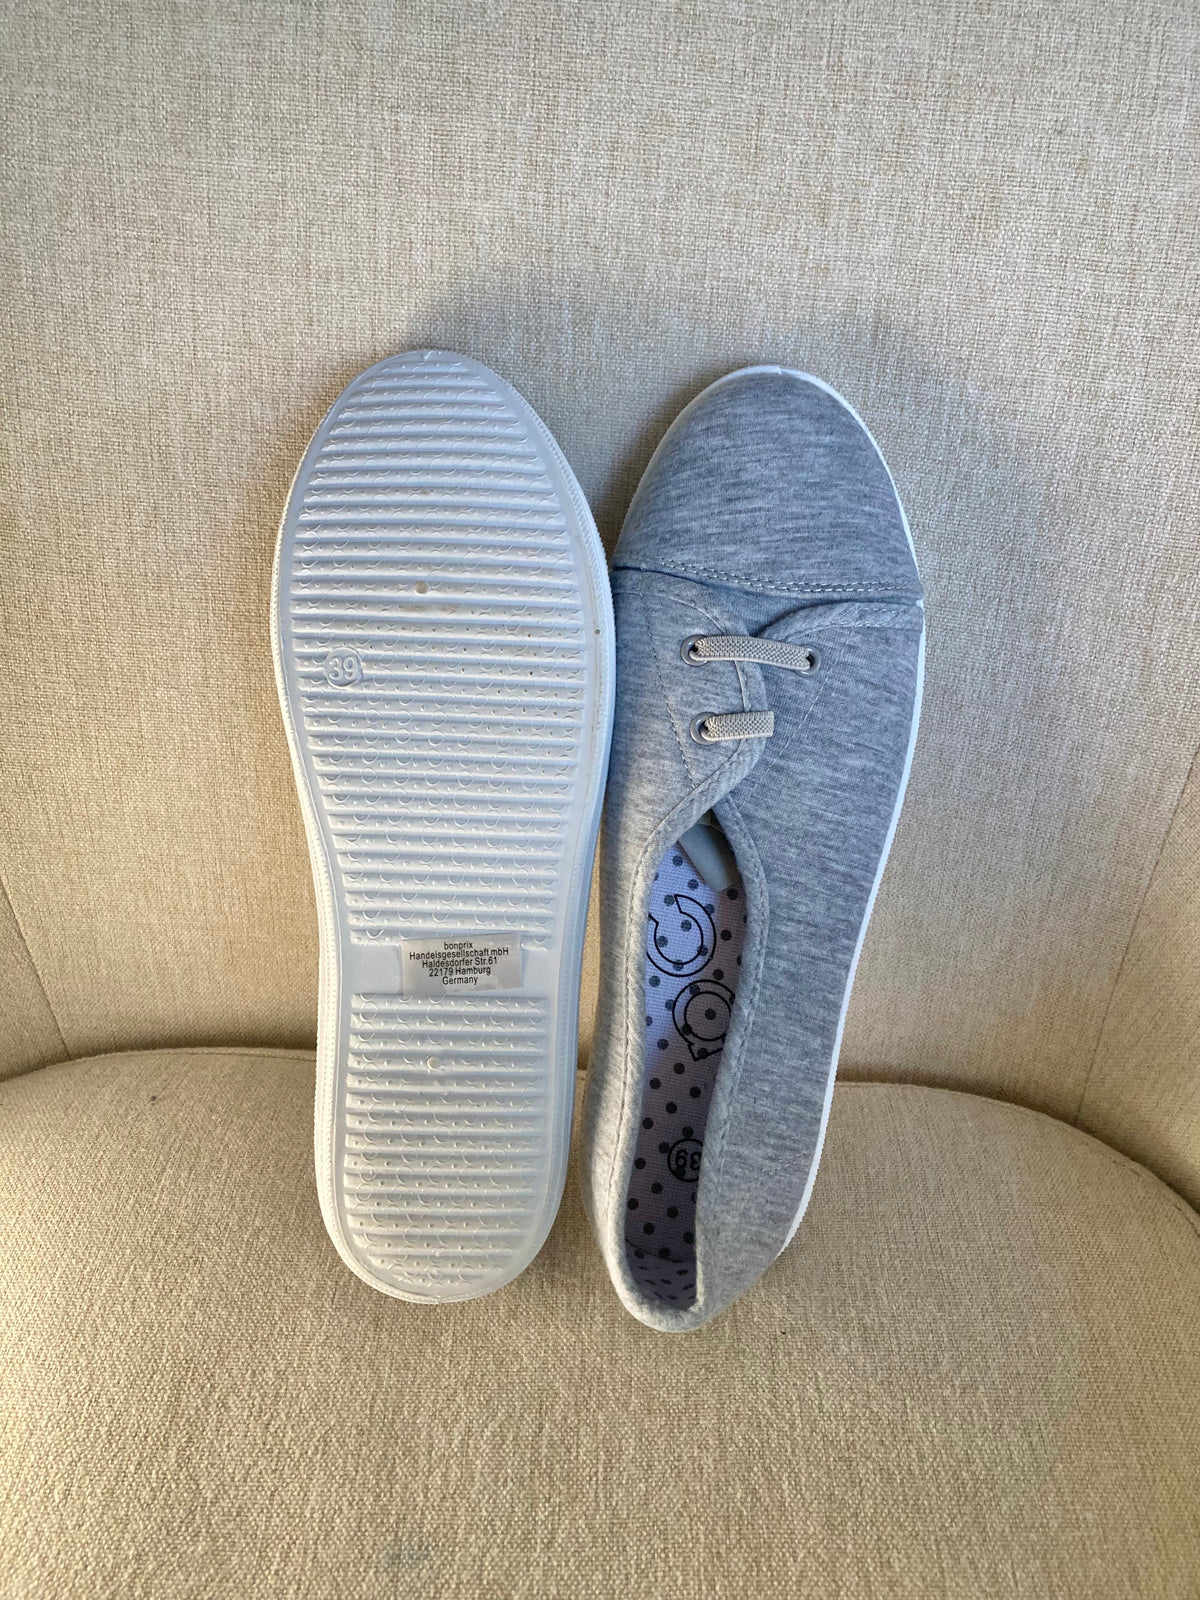 Soft comfort Grey pumps size 6 by BPC